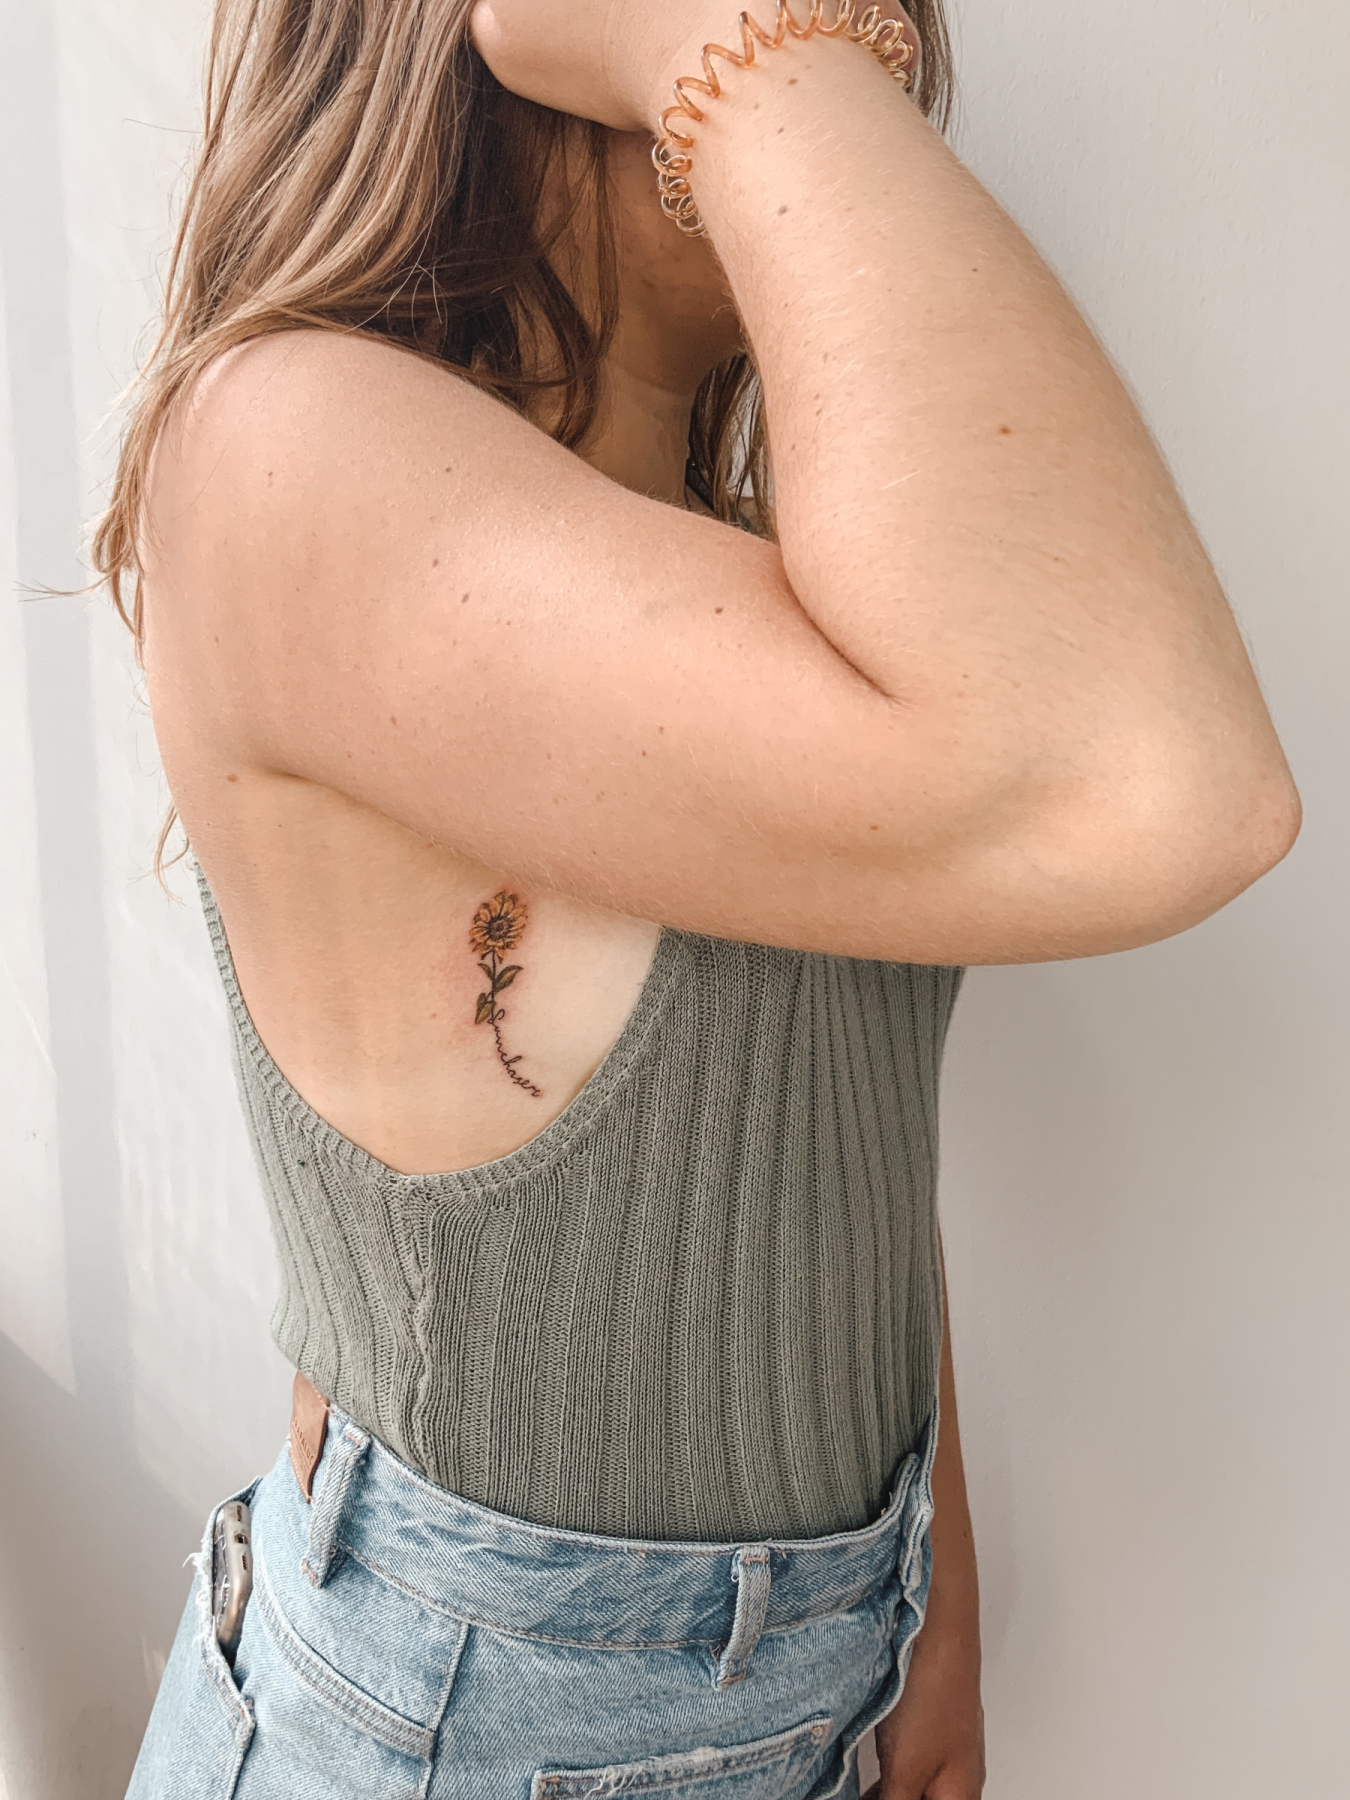 The Best Place For Women To Get A Tattoo In Lima | lifestyletraveler.co | IG: @lifestyletraveler.co